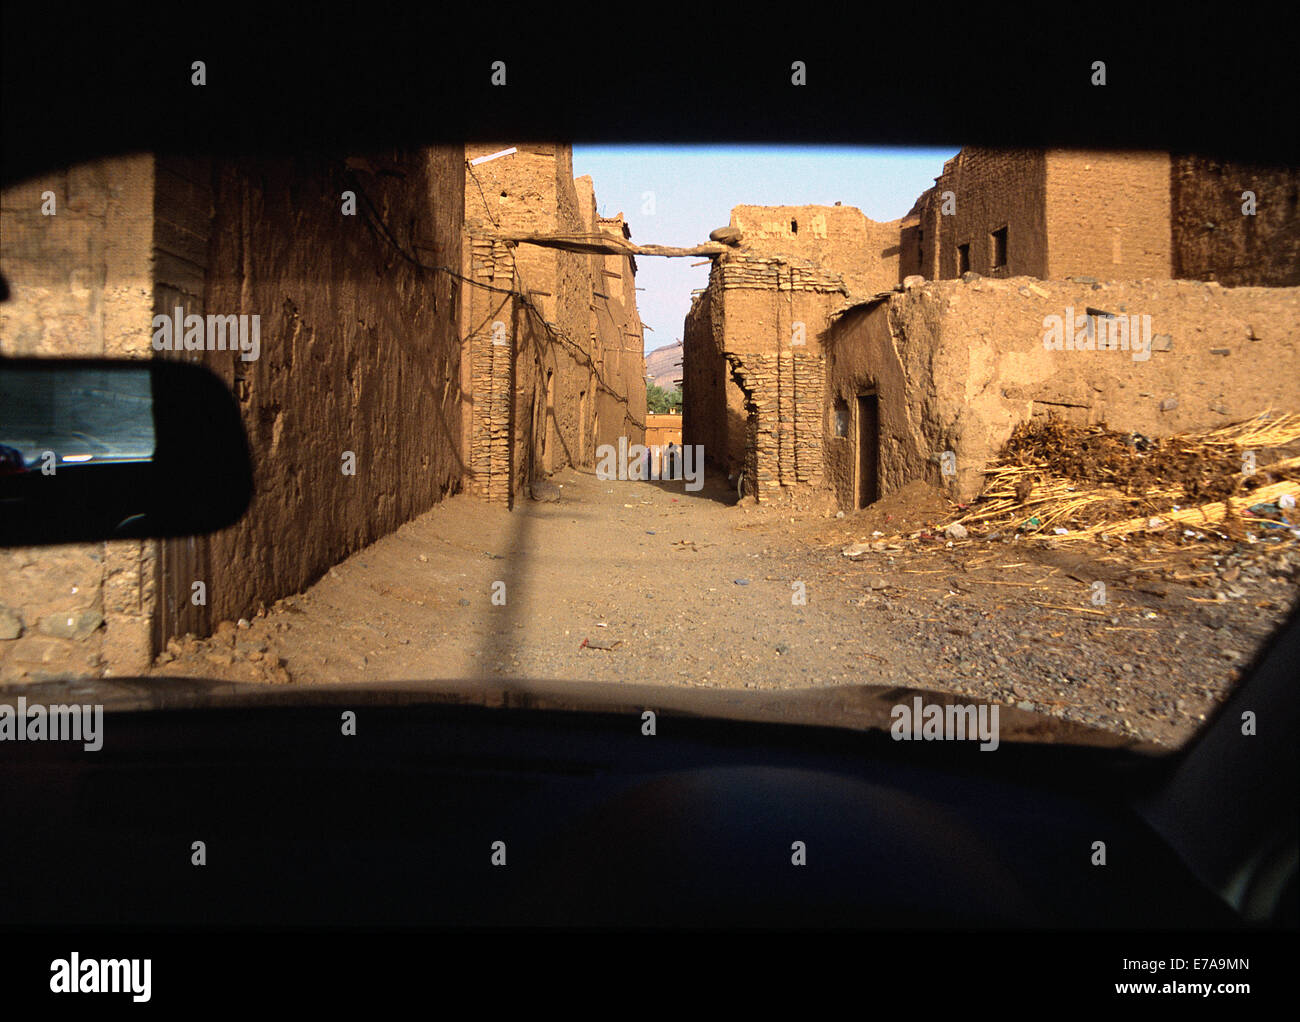 View of old ruin buildings through windshield, Agdz, Morocco Stock Photo